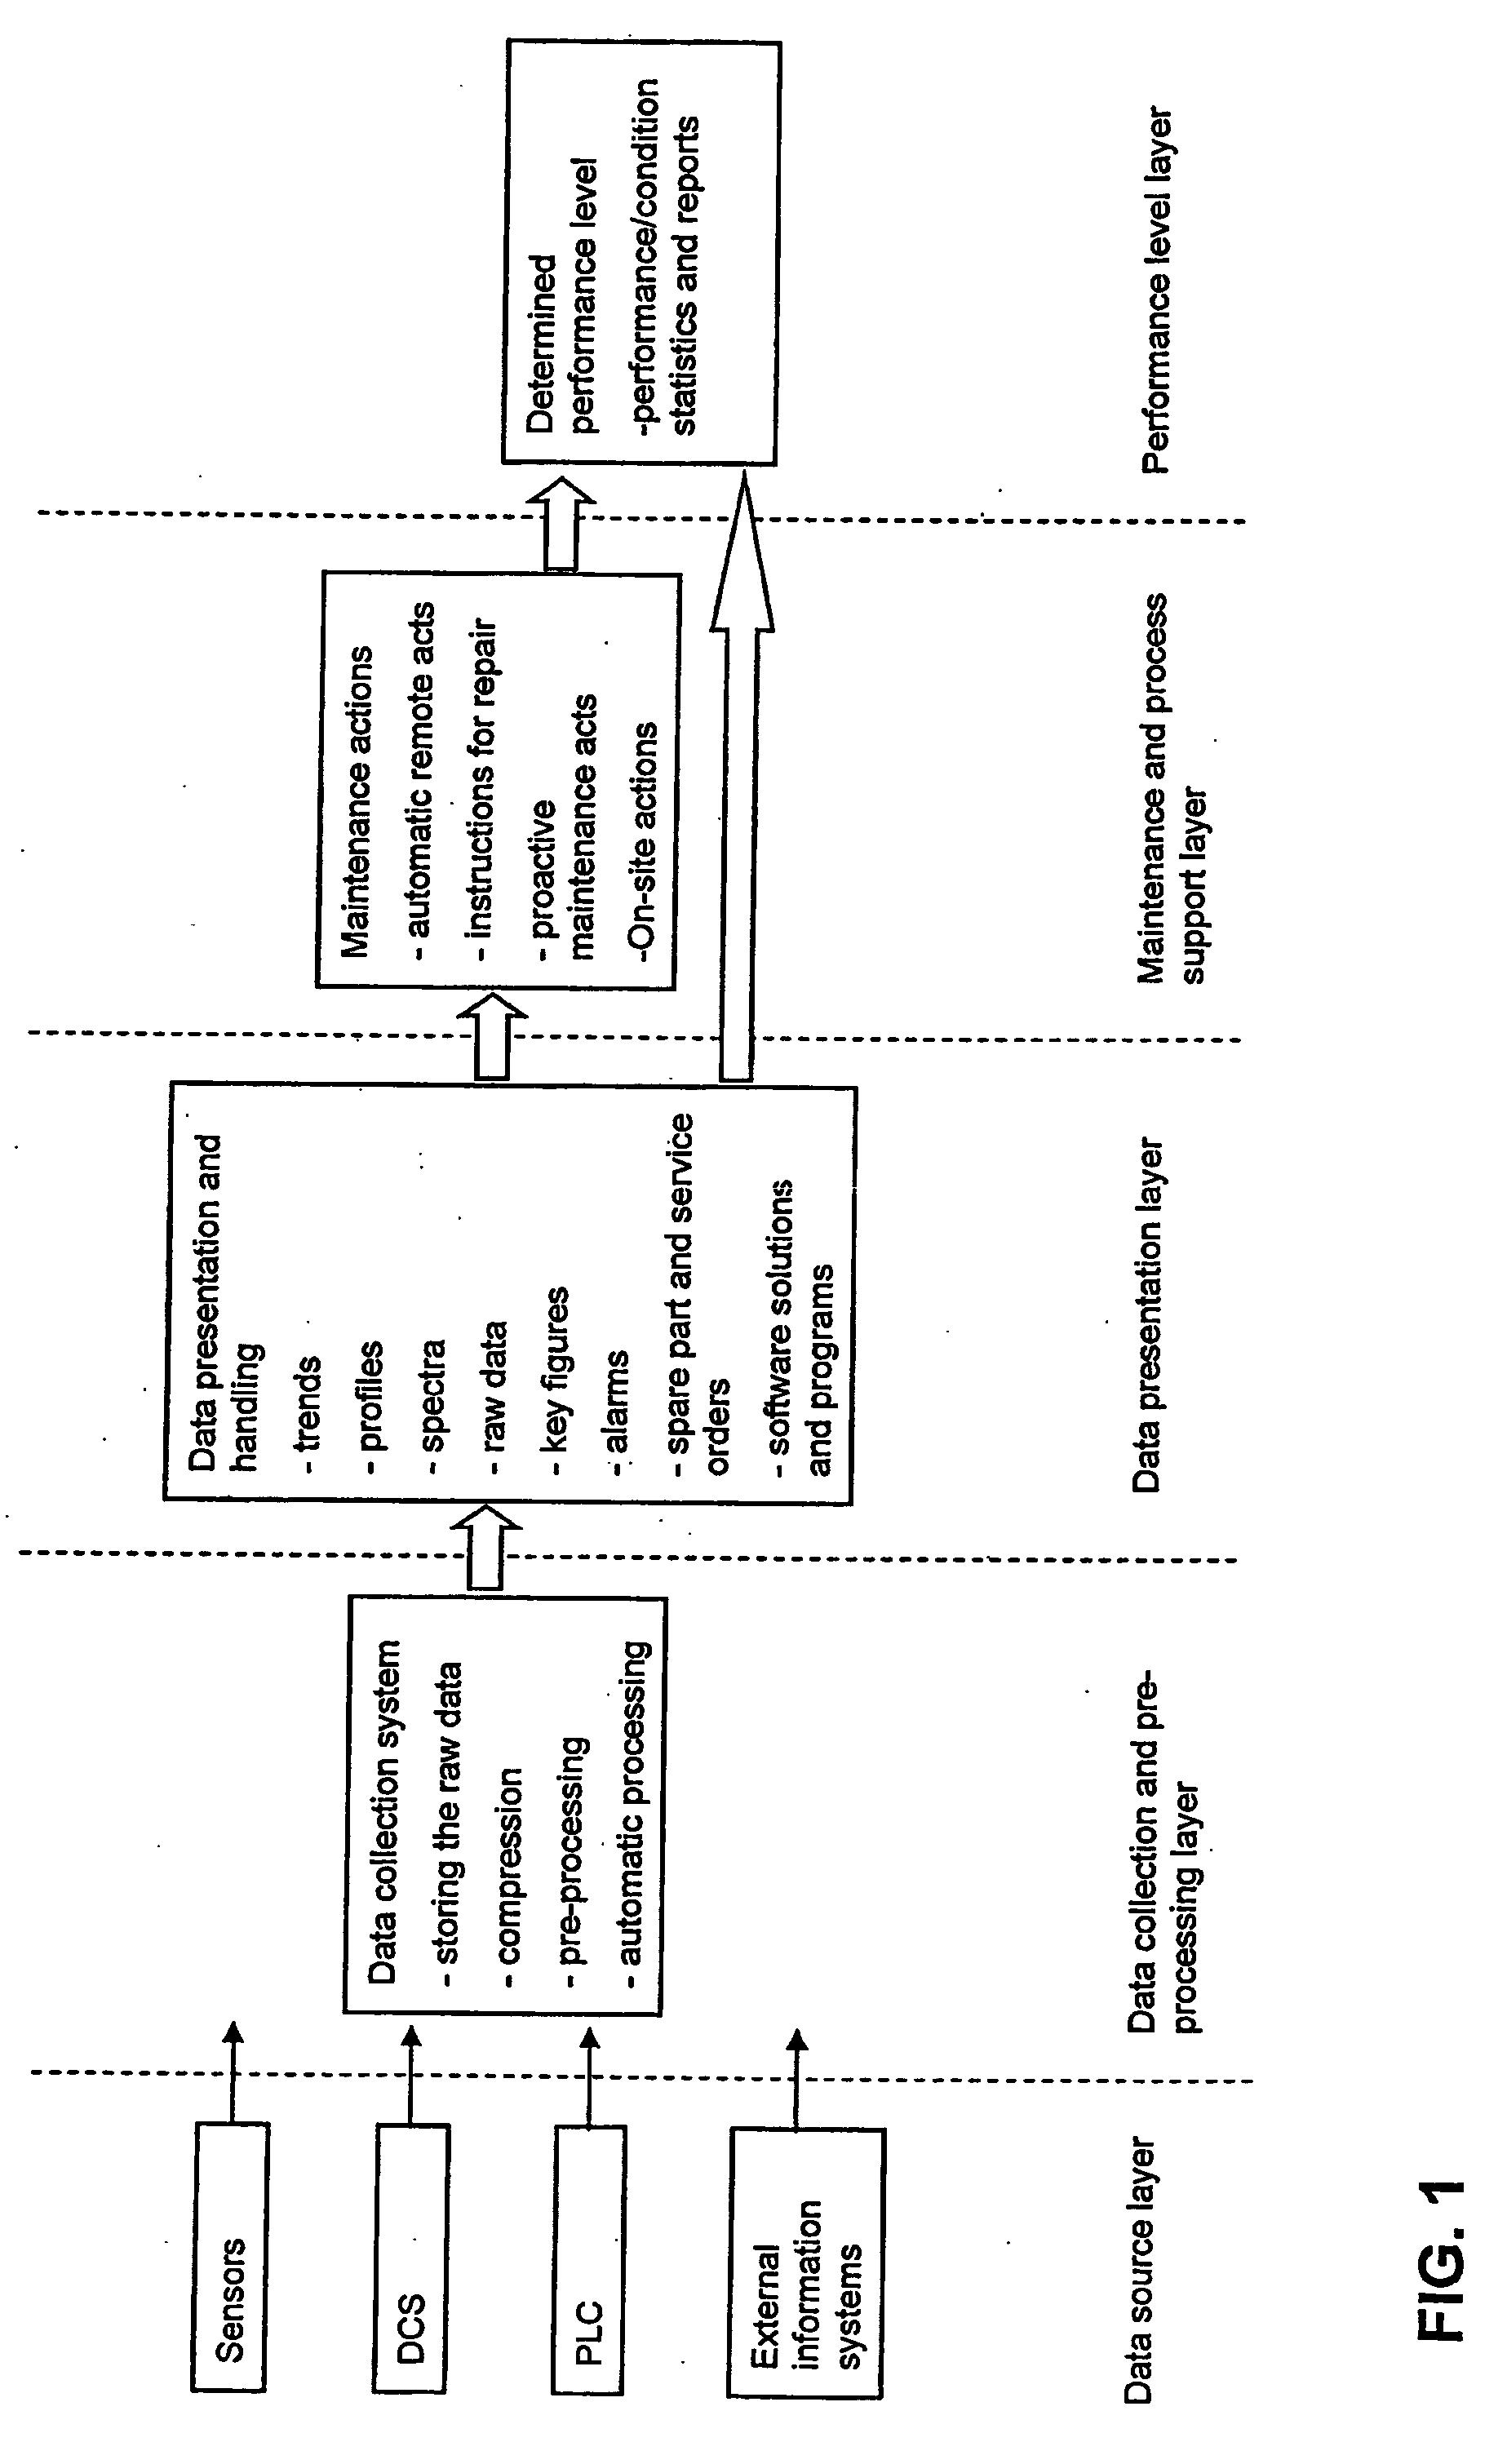 Method for selling maintenance and process support services for papermaking machines